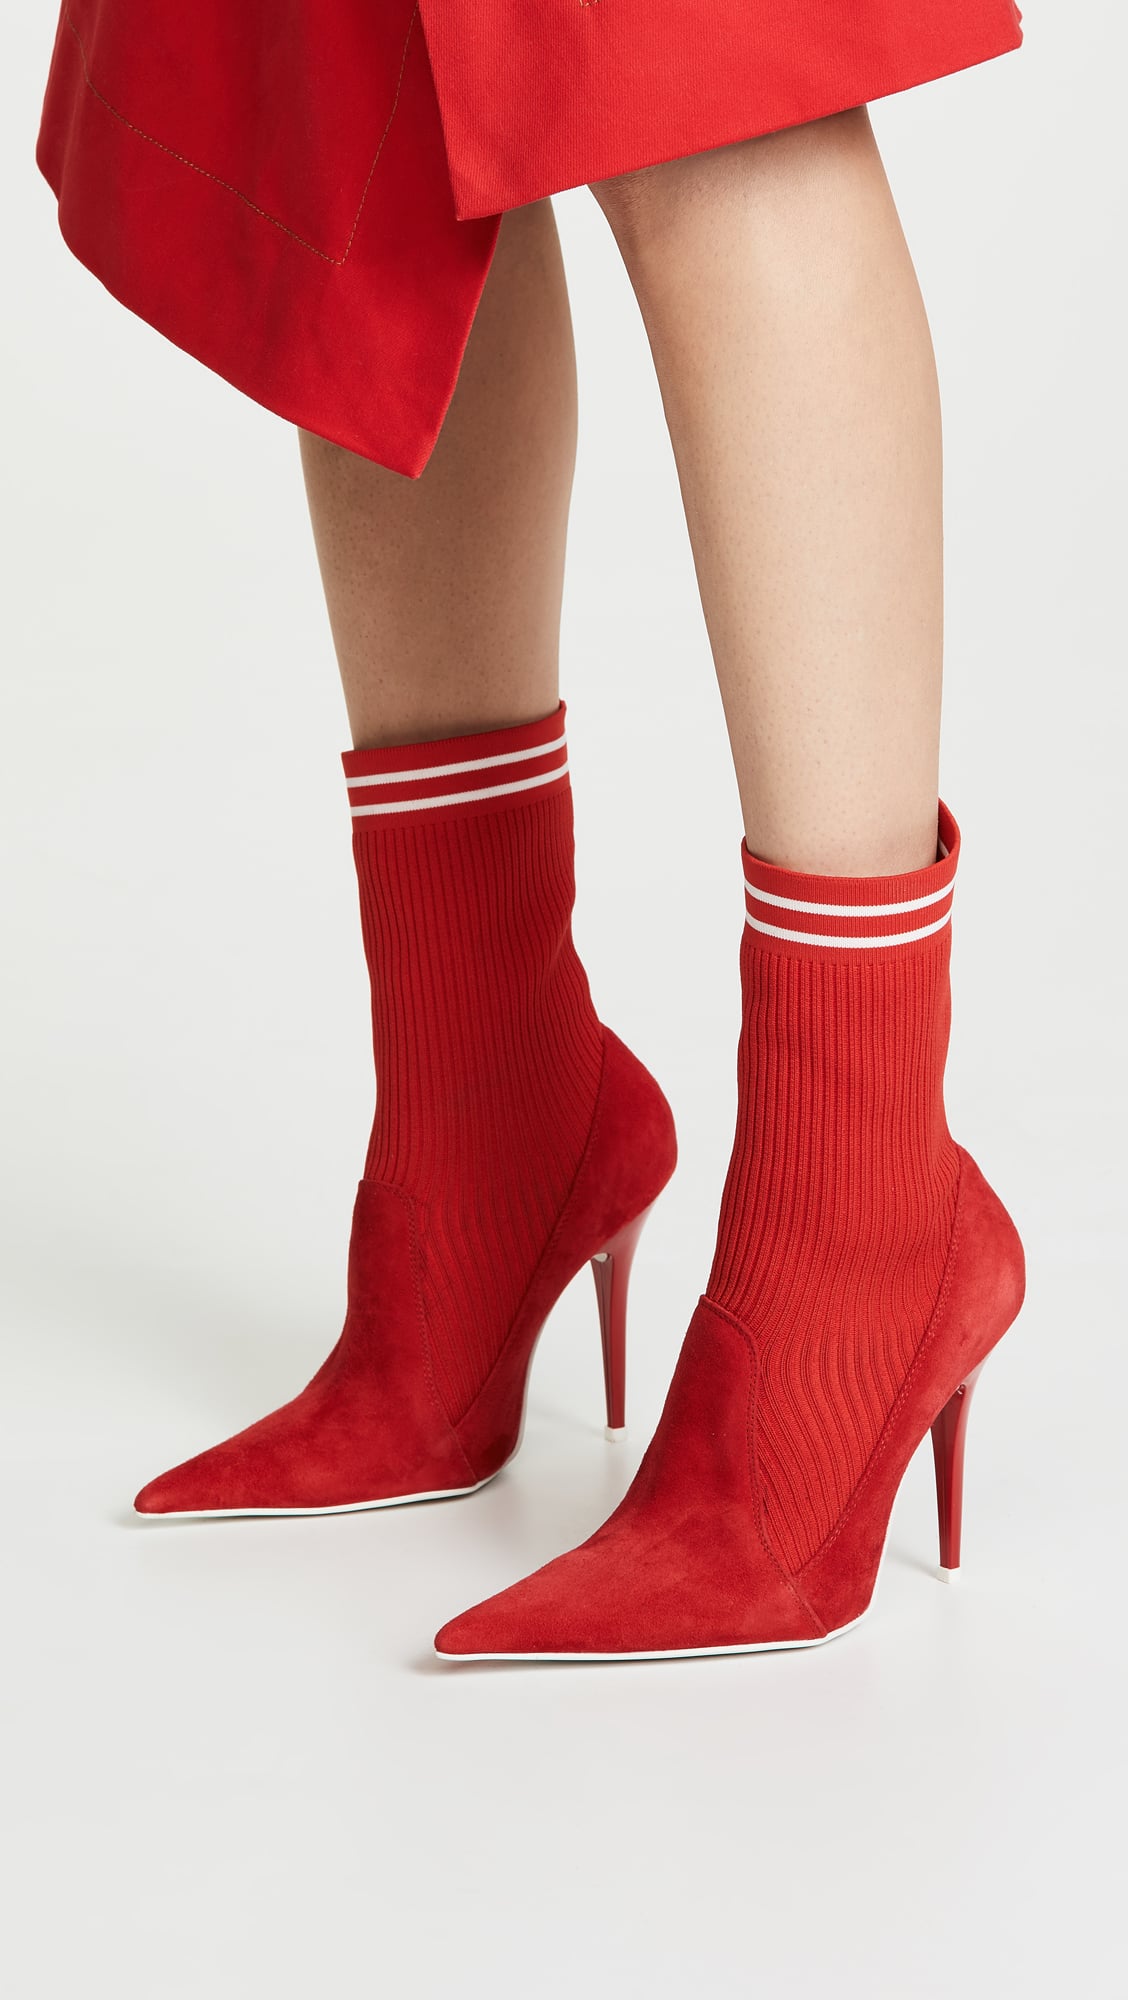 Jeffrey Campbell Starter Sock Booties | Statement Every Fashion Girl Should on Her Shopping List For Fall | Fashion Photo 18